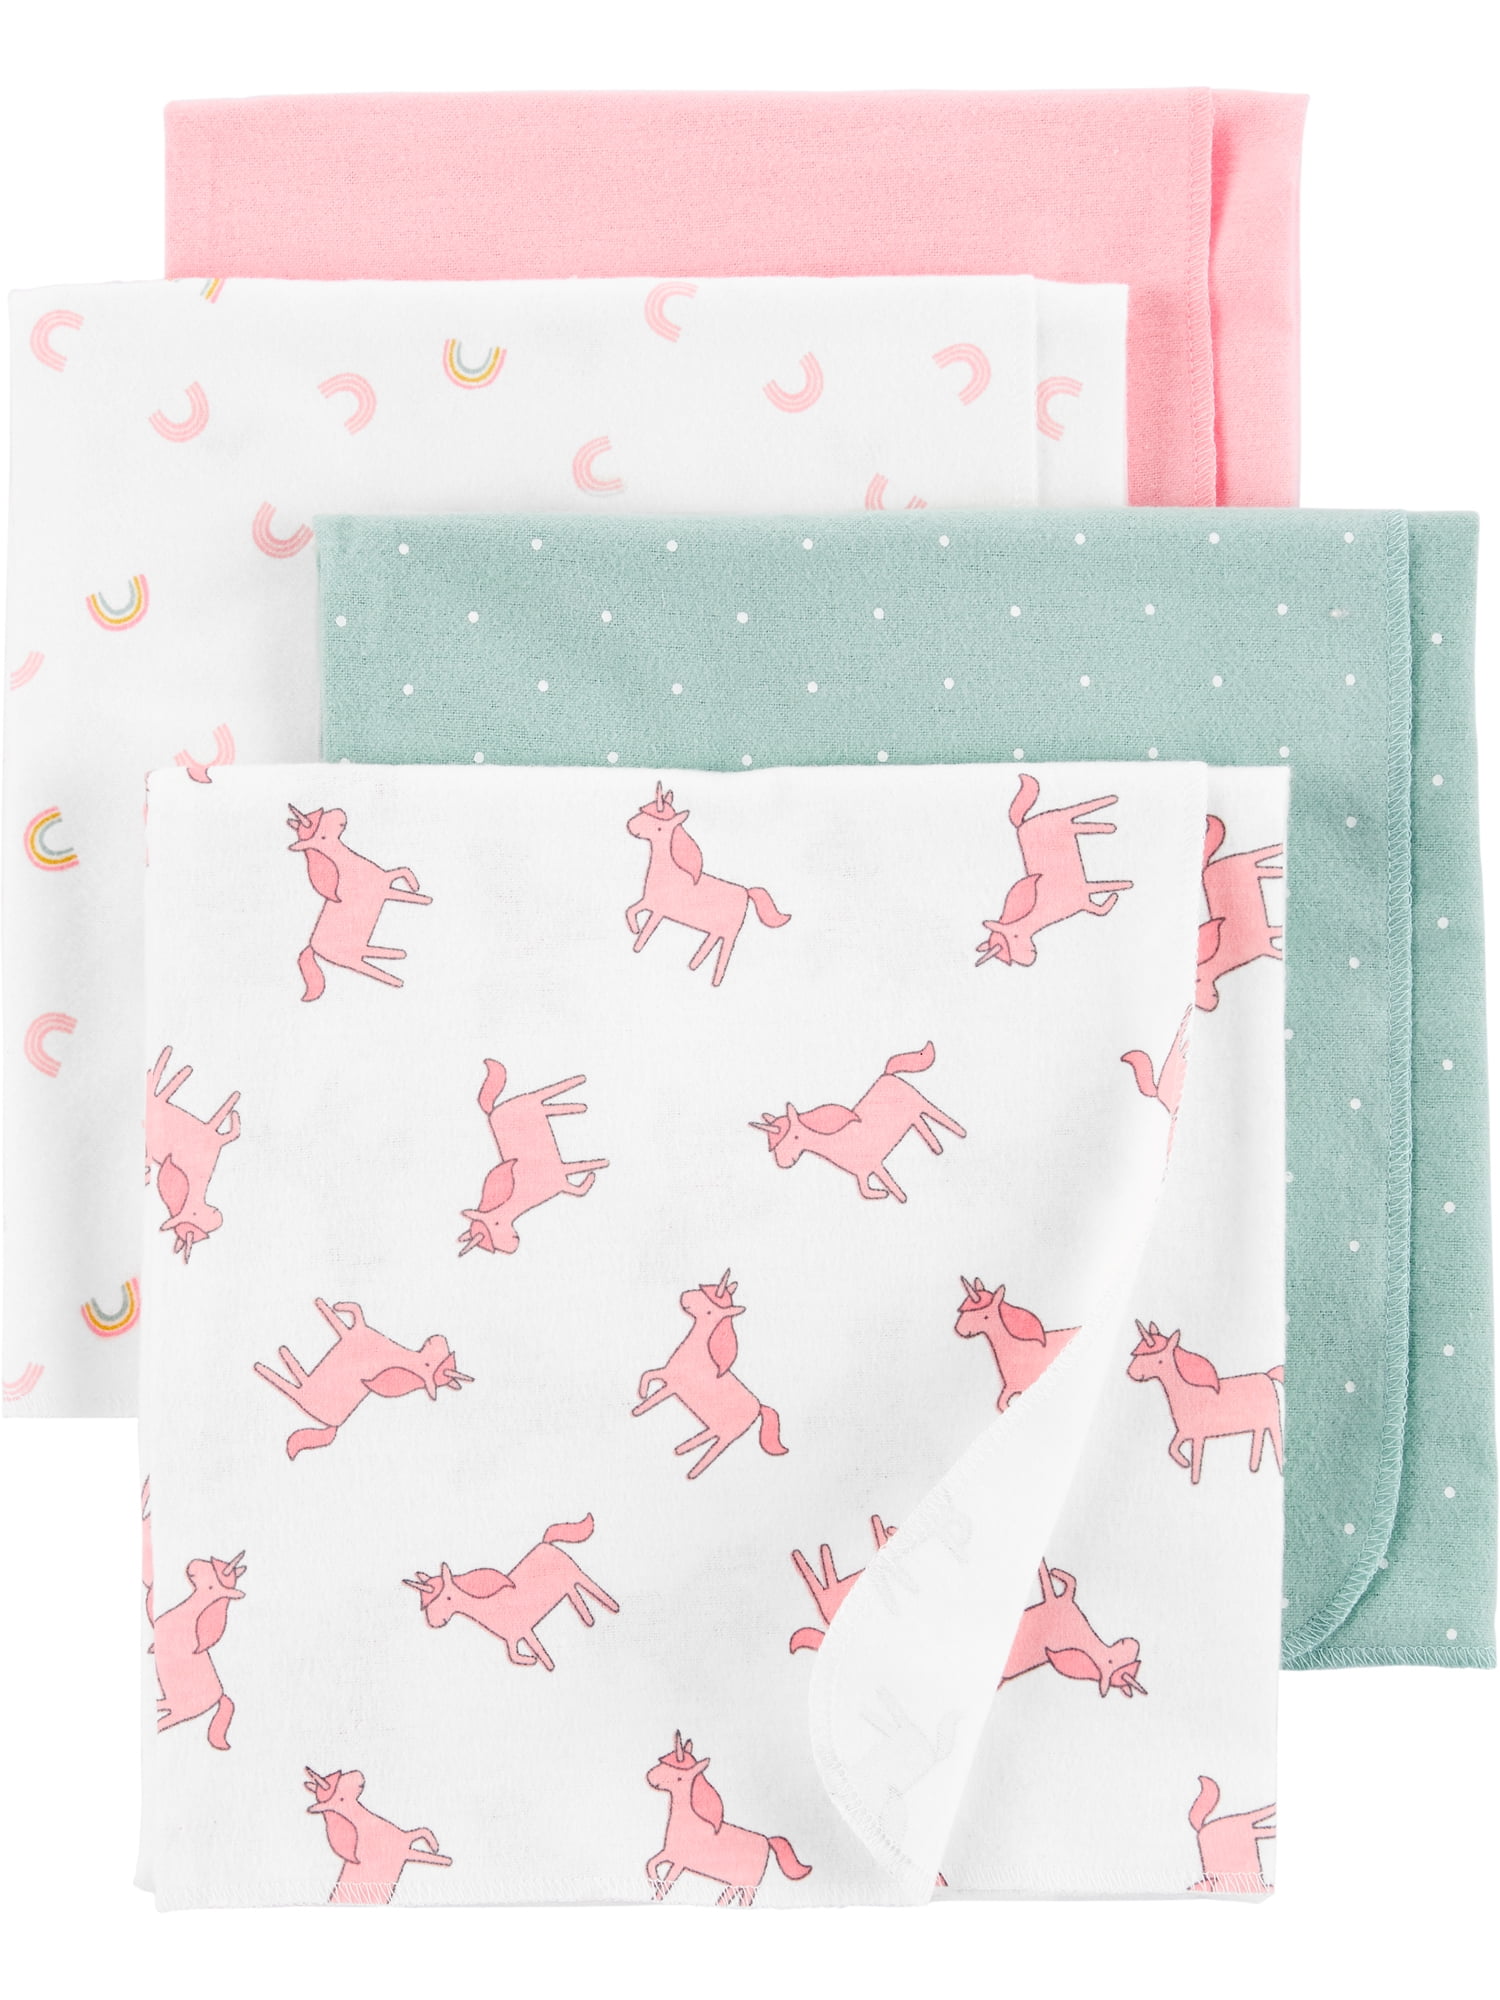 Lovable and Cozy 4-Pack Receiving Baby Blankets Pink Dinosaur 100% Cotton 26 x 26 Your Little One Will Love